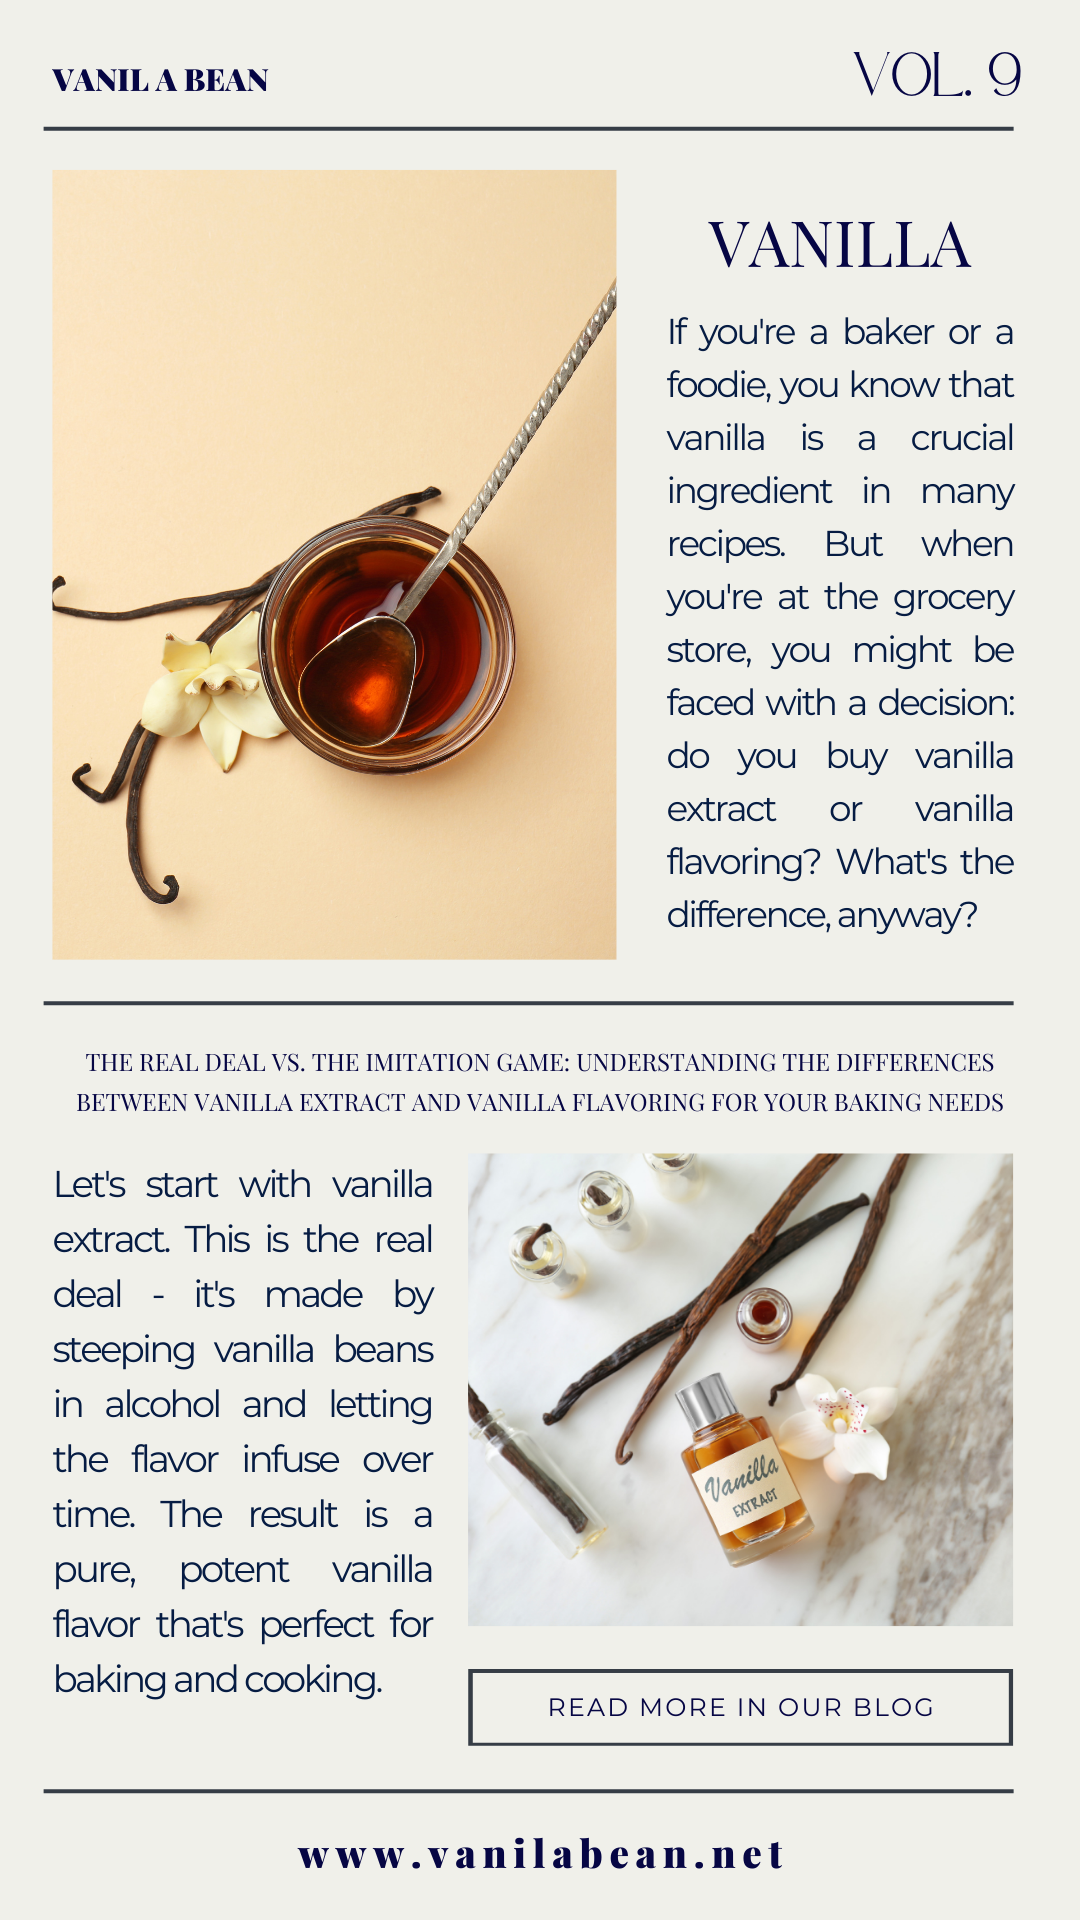 he Real Deal vs. the Imitation Game: Understanding the Differences Between Vanilla Extract and Vanilla Flavoring for Your Baking Needs